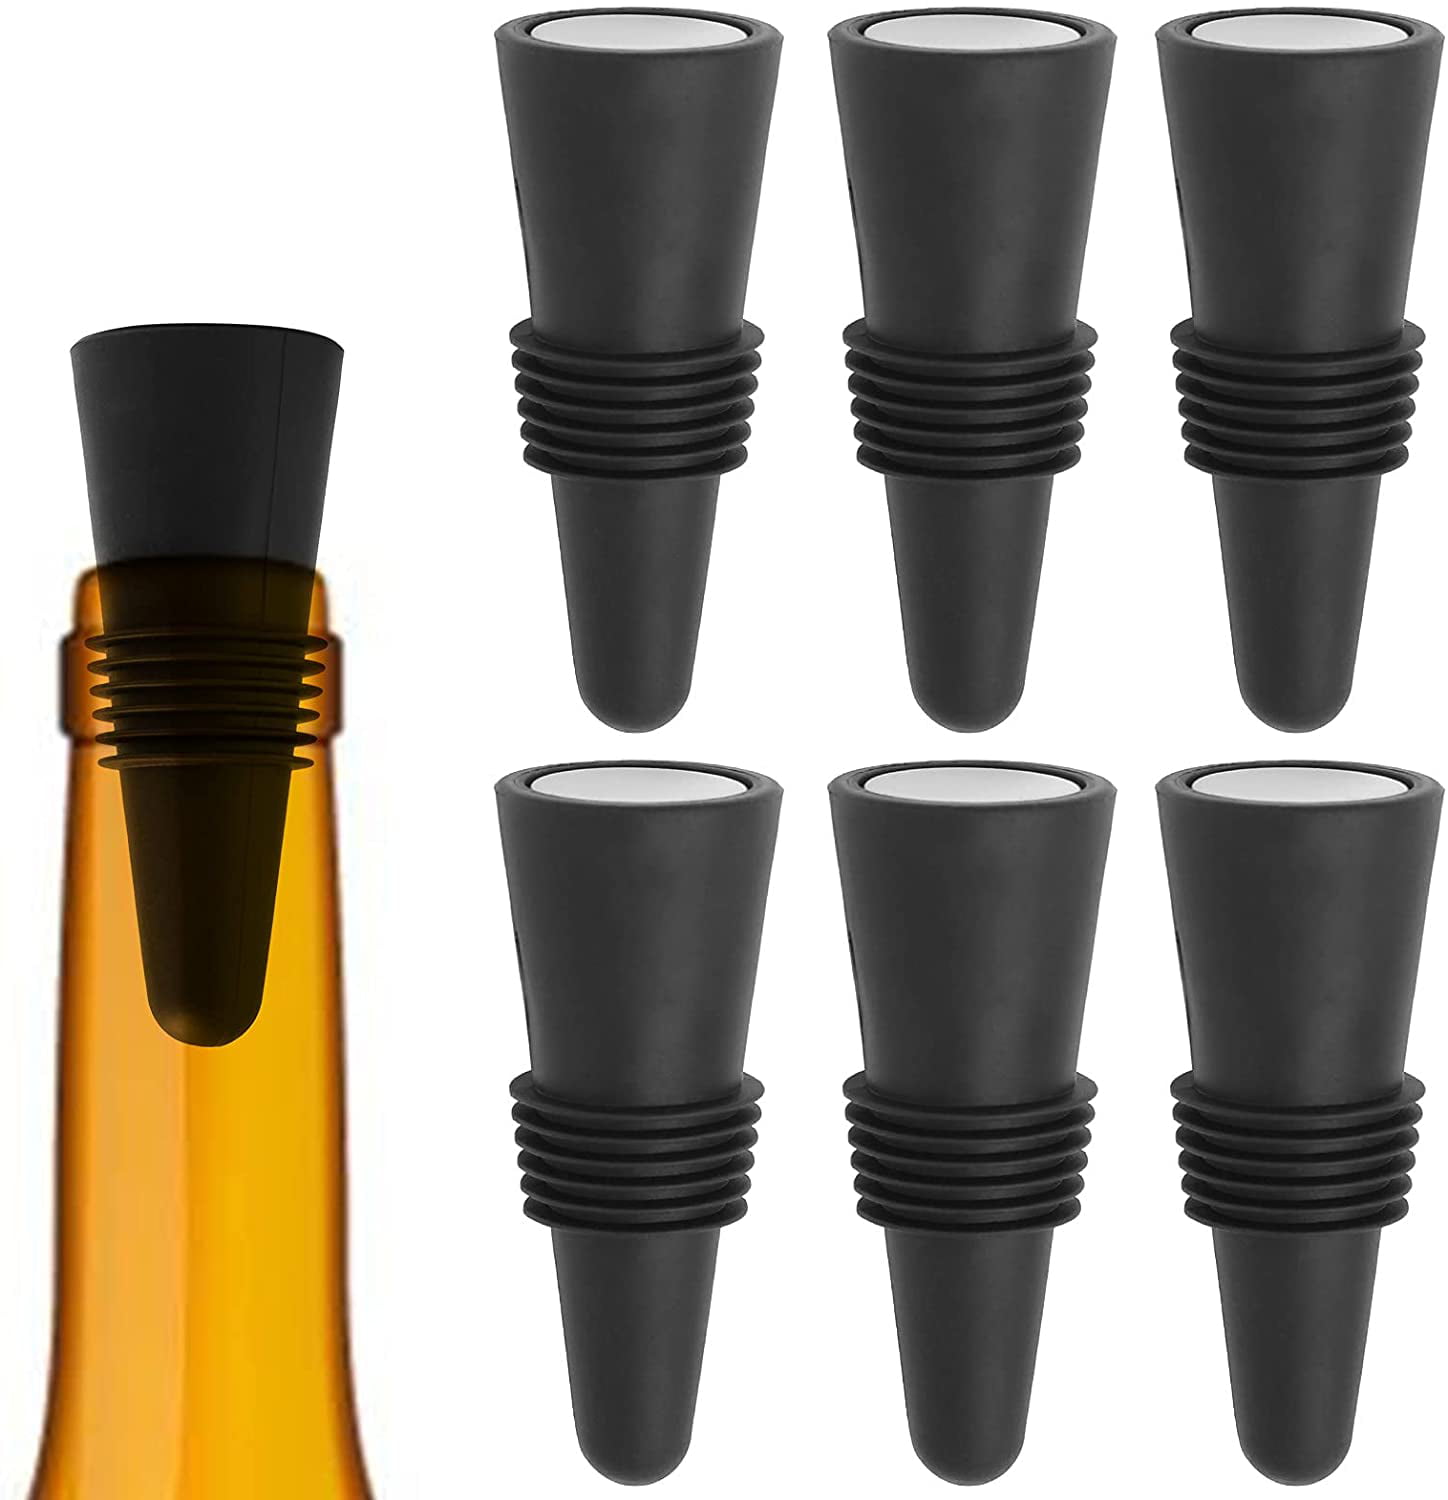 5 Colors Mixed Wine Stoppers with Grip Top Wine Bottle Stoppers,15 Pack Reusable Silicone Beverage Bottle Stoppers Decorative Bottle Sealer for Champagne Wine Saver 